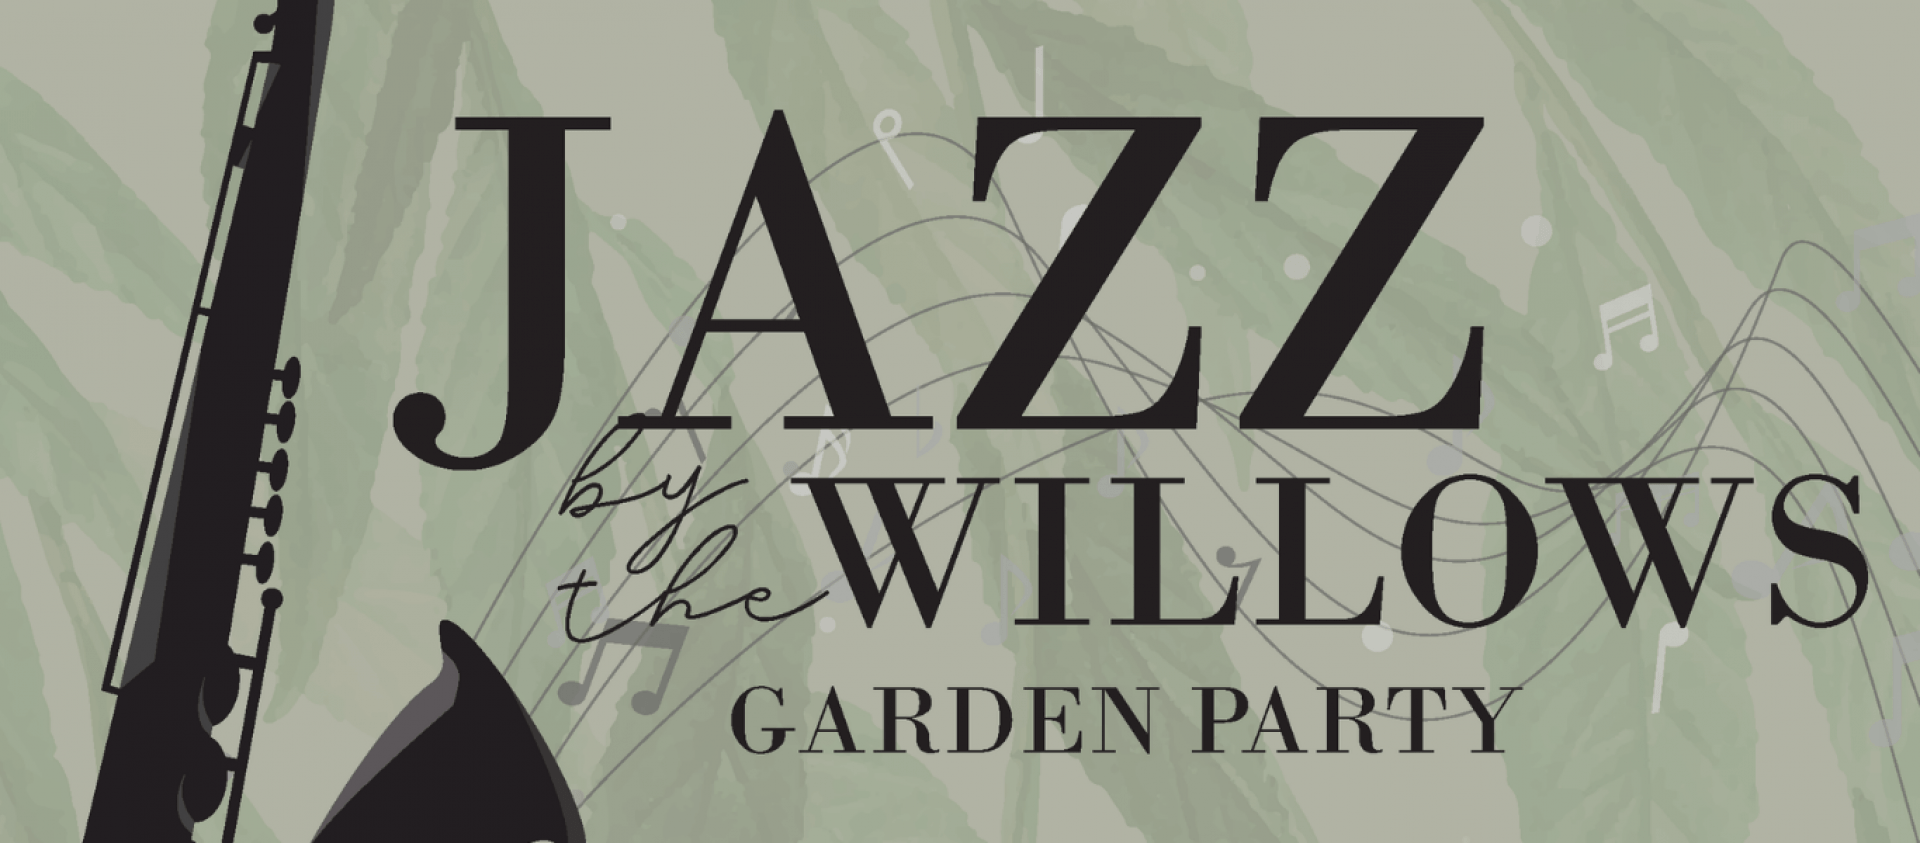 Jazz By The Willows Garden Party Banner